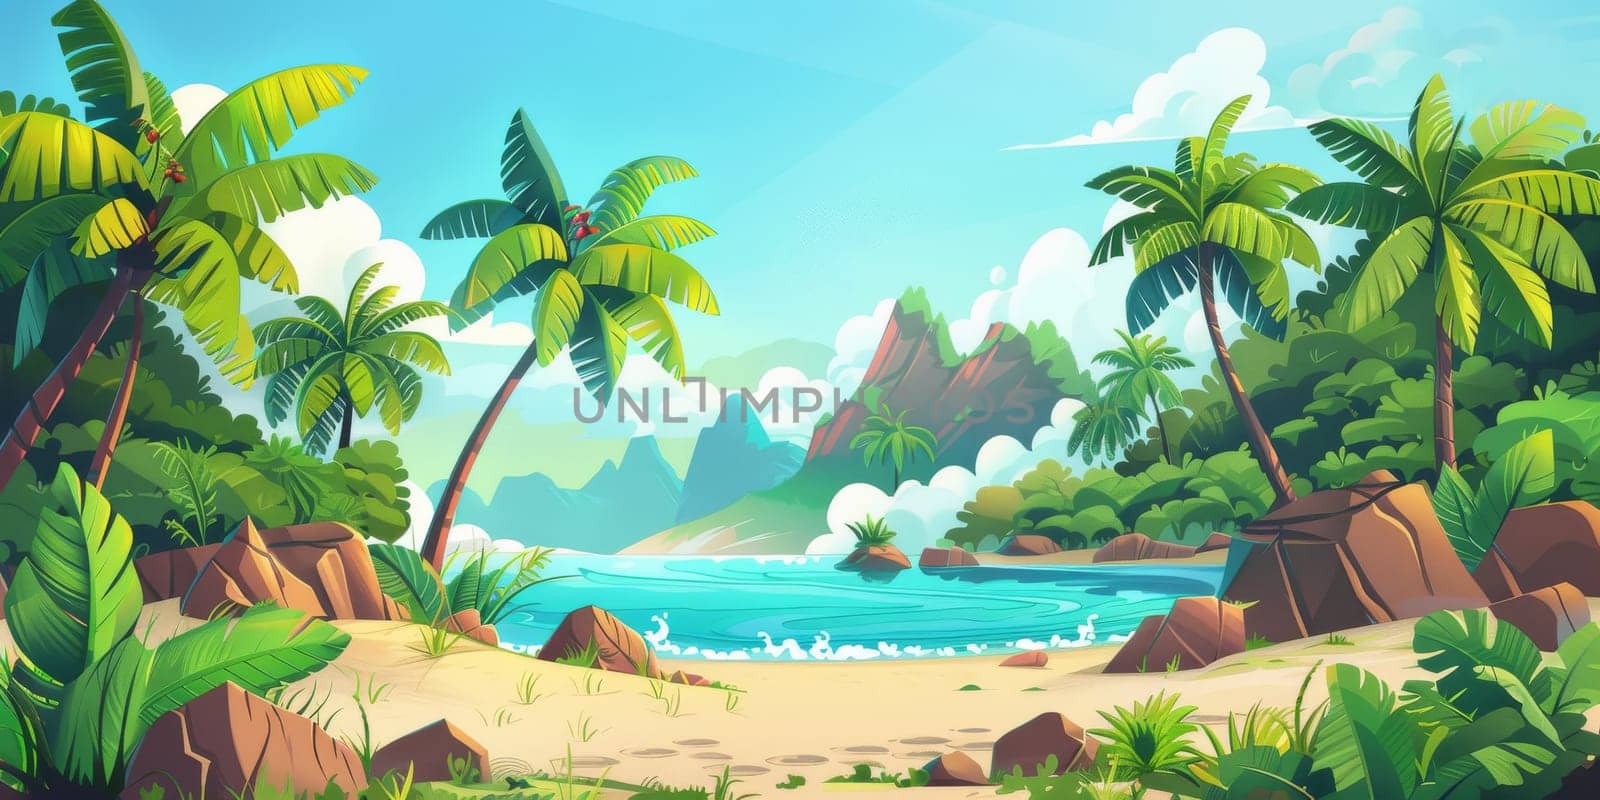 Vibrant painting featuring a tropical beach with palm trees under a clear sky by Kadula